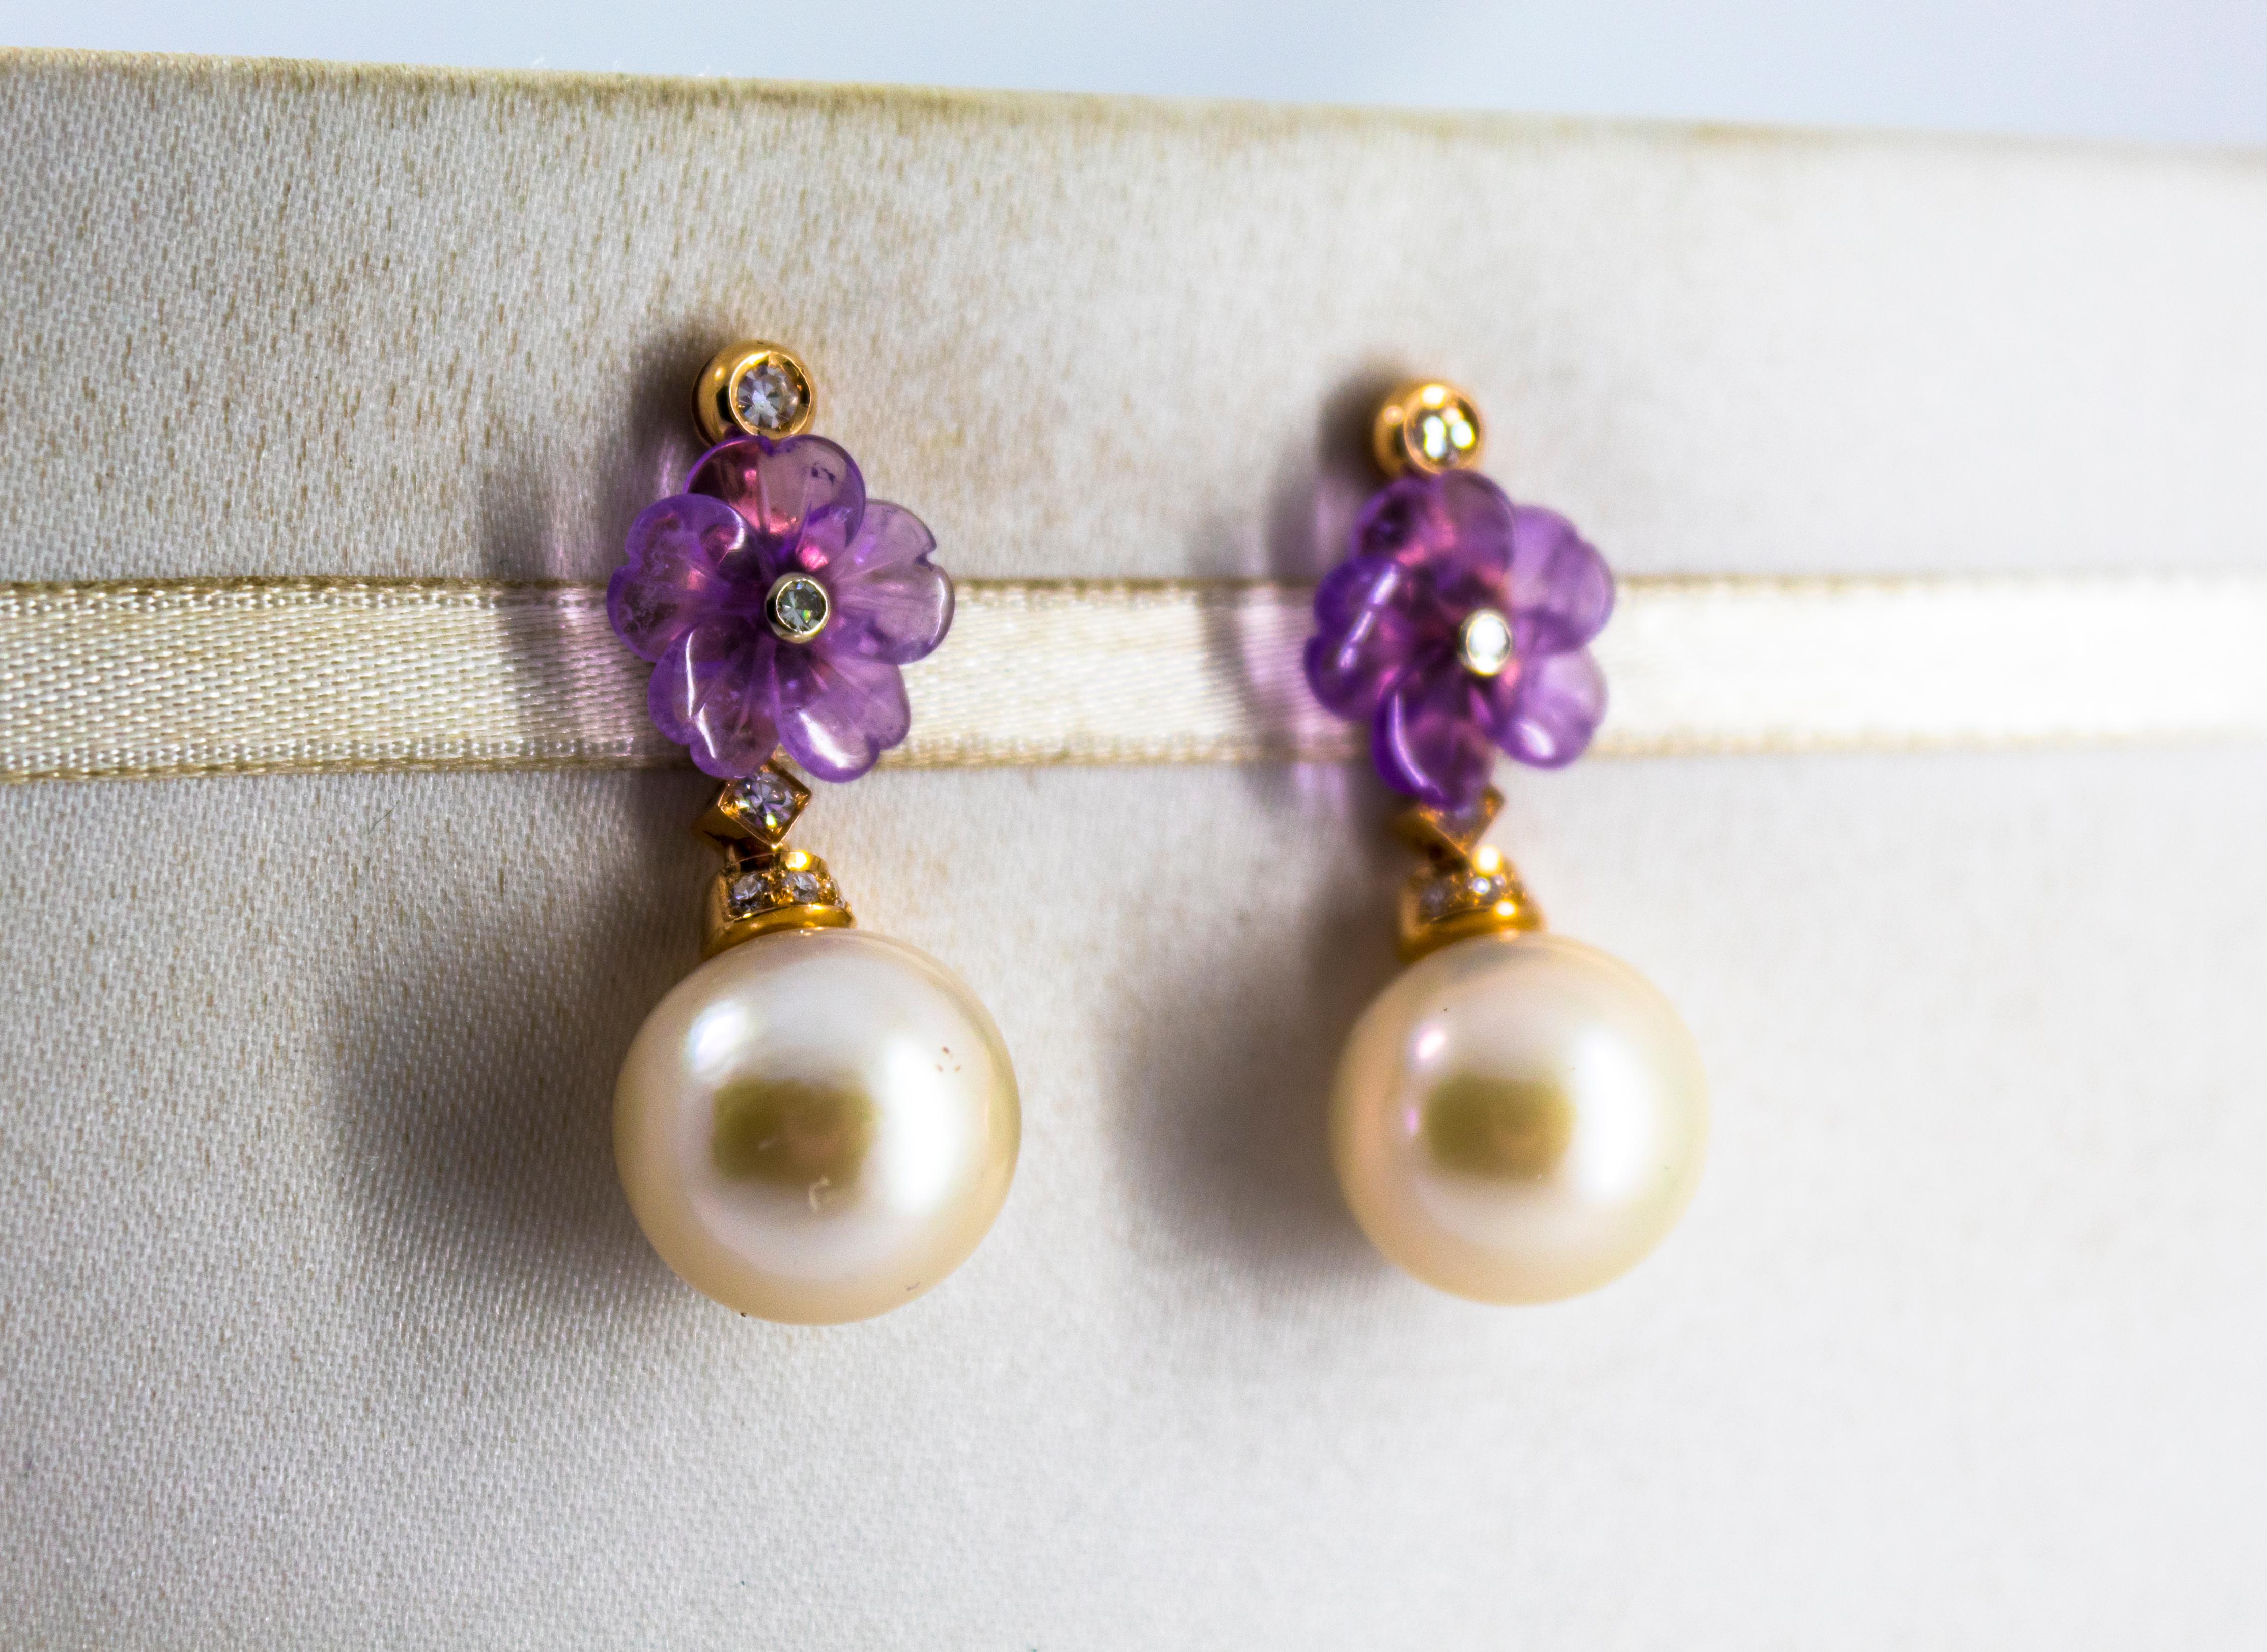 These Stud Earrings are made of 14K Yellow Gold.
These Earrings have 0.20 Carats of White Diamonds.
These Earrings have also 35.00 Carats of Pearls and Amethyst.
These Earrings are available also with Green Flowers made of Agate or White Flowers